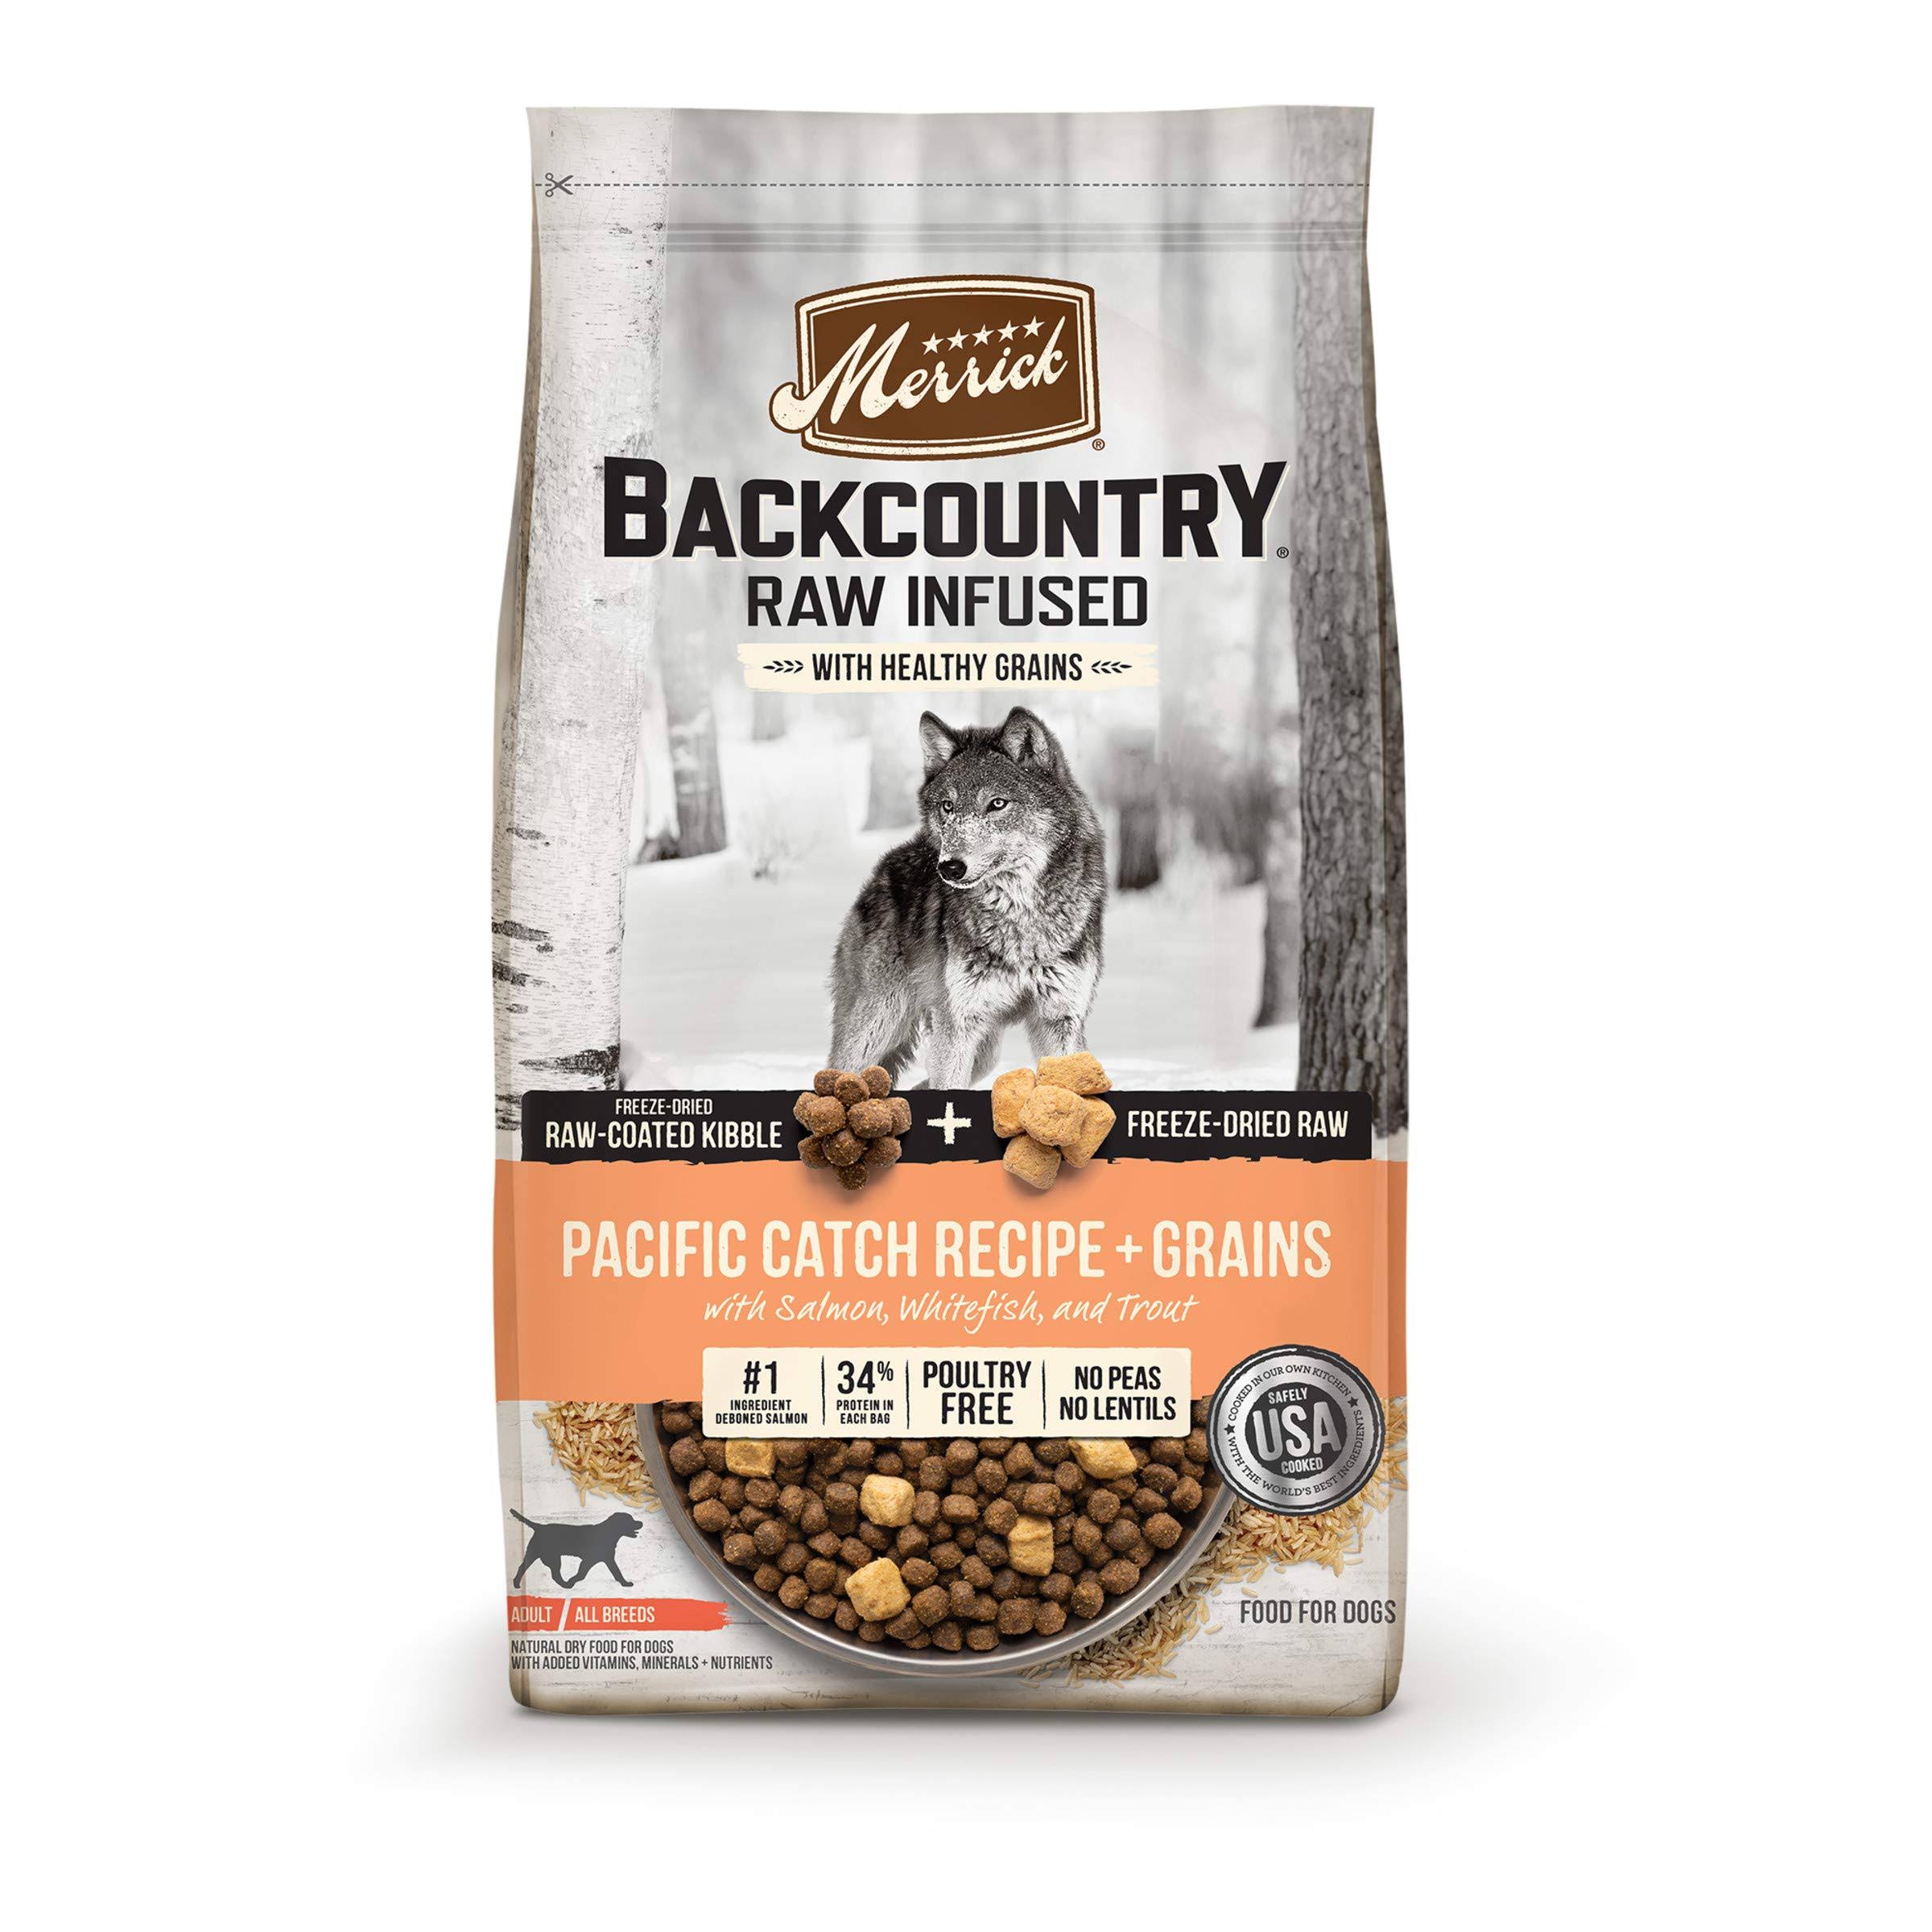 Merrick Backcountry Raw Infused Pacific Catch Recipe with Healthy Grains Dry Dog Food, 10 lbs.